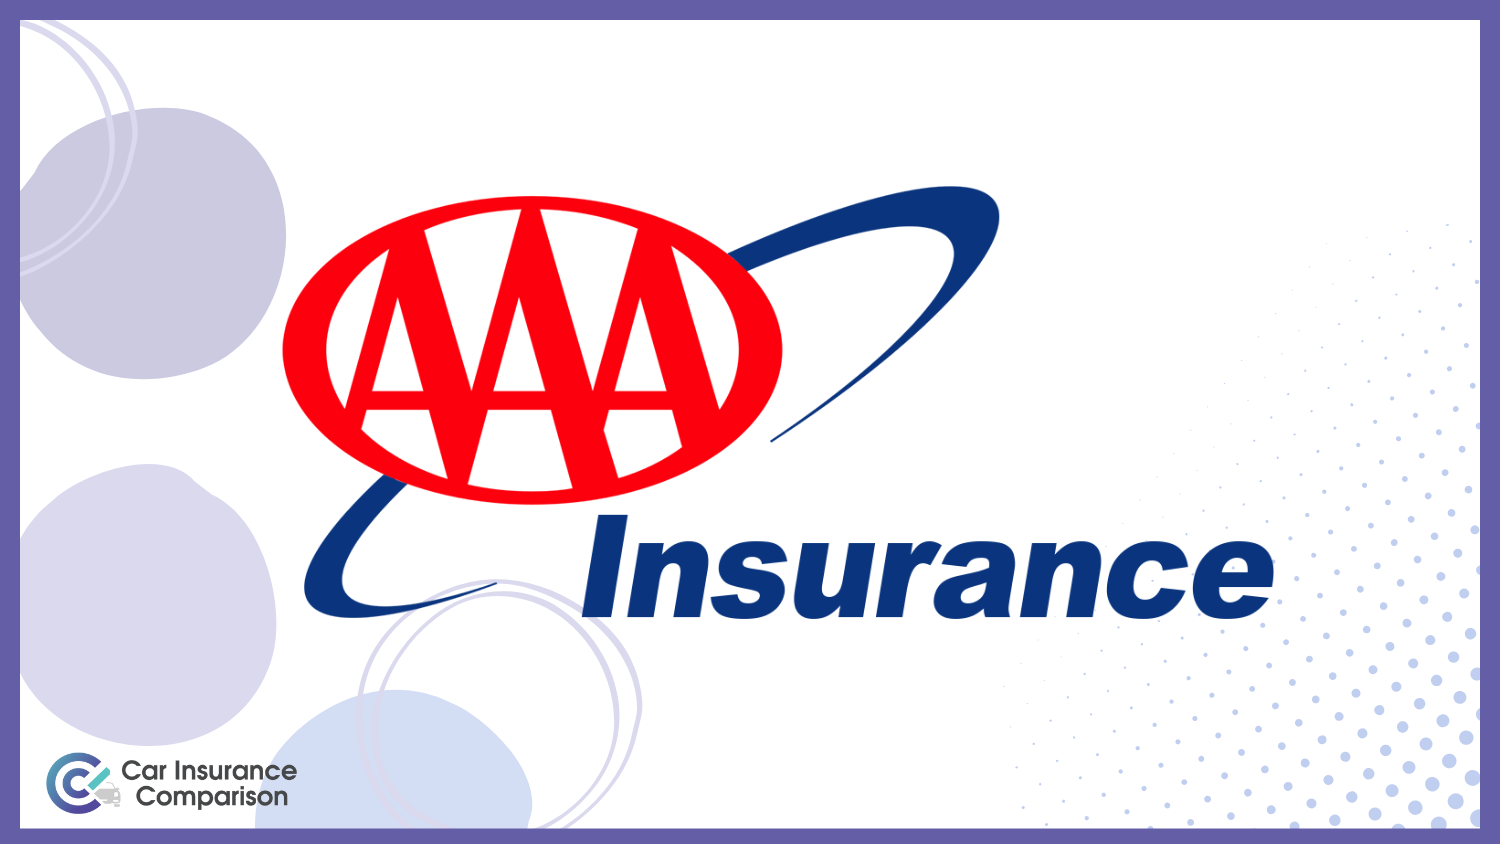 AAA: Best Commercial Car Insurance Companies